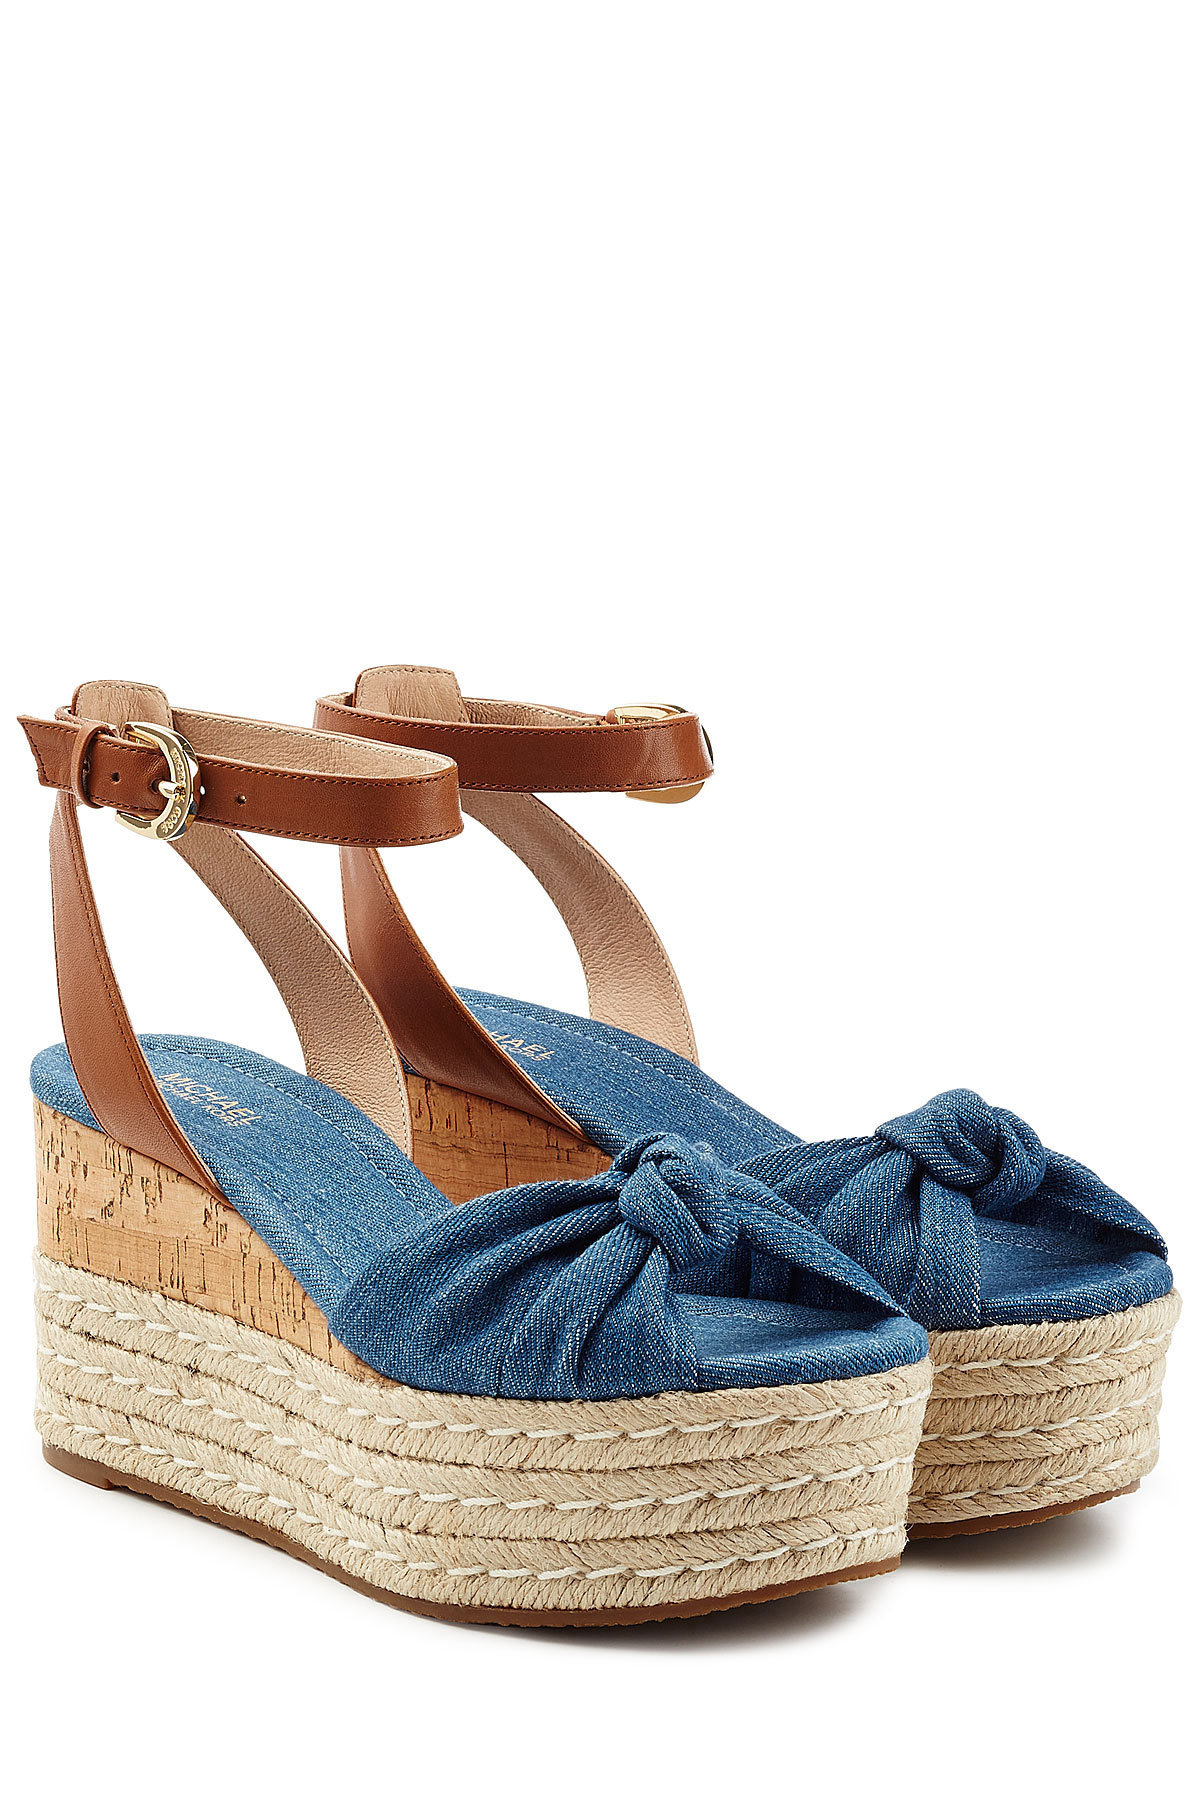 MICHAEL Michael Kors - Denim Wedges with Leather